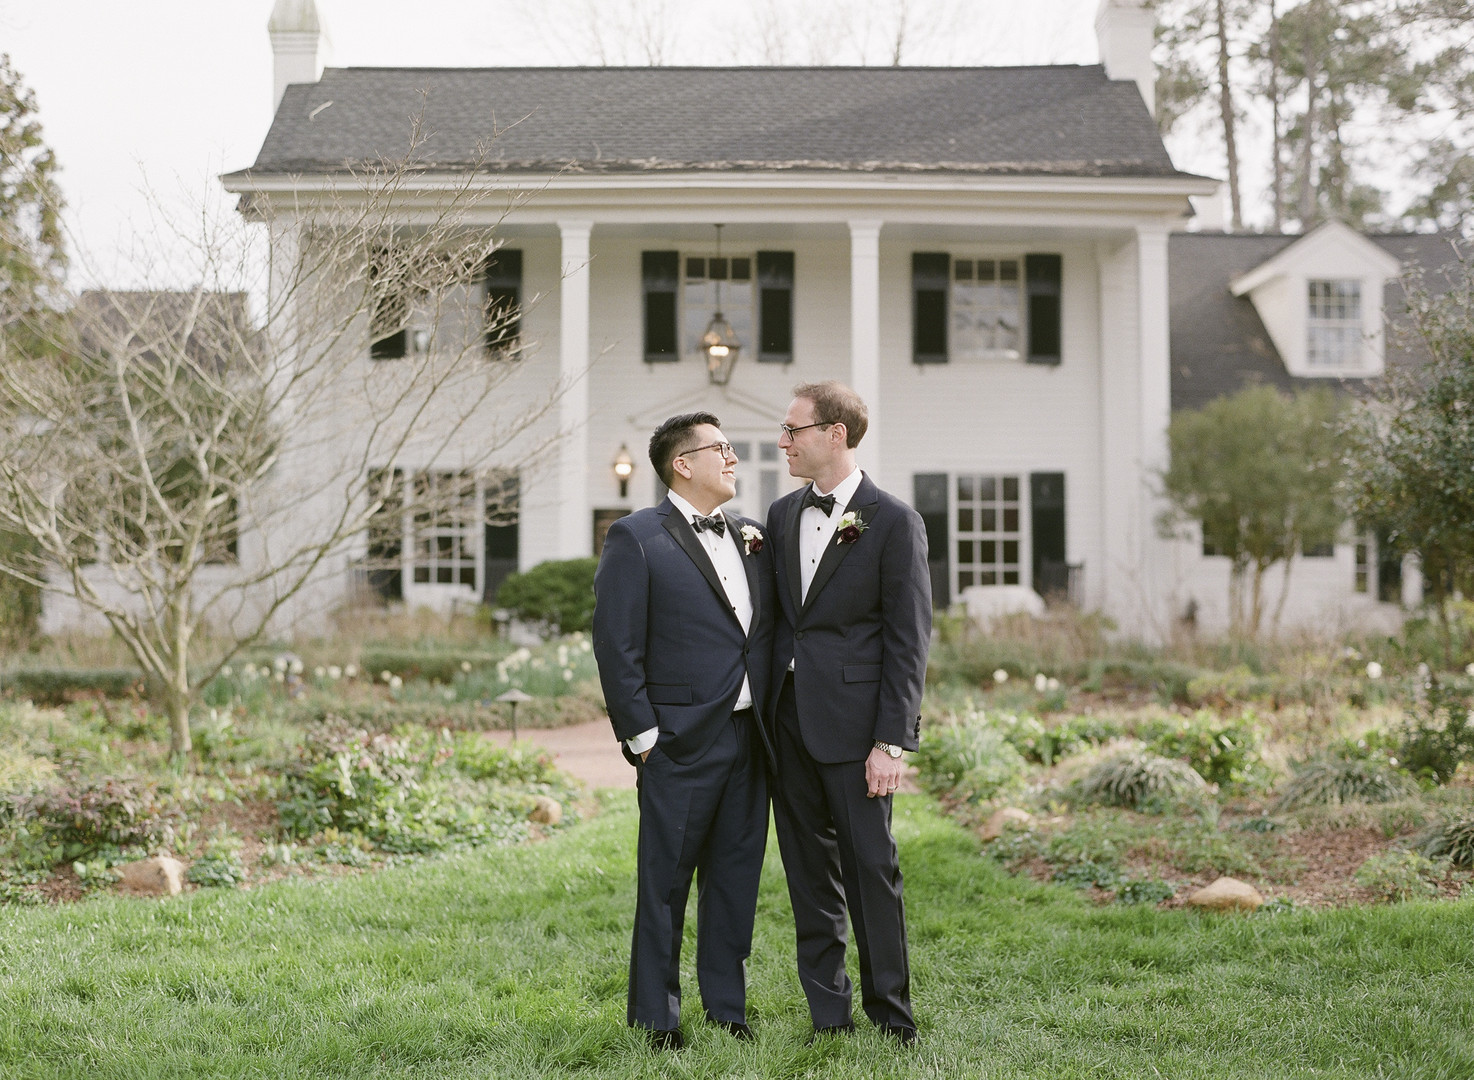 Spring countryside wedding with Mexican traditions two grooms suits bow ties Chapel Hill gay wedding North Carolina March barn